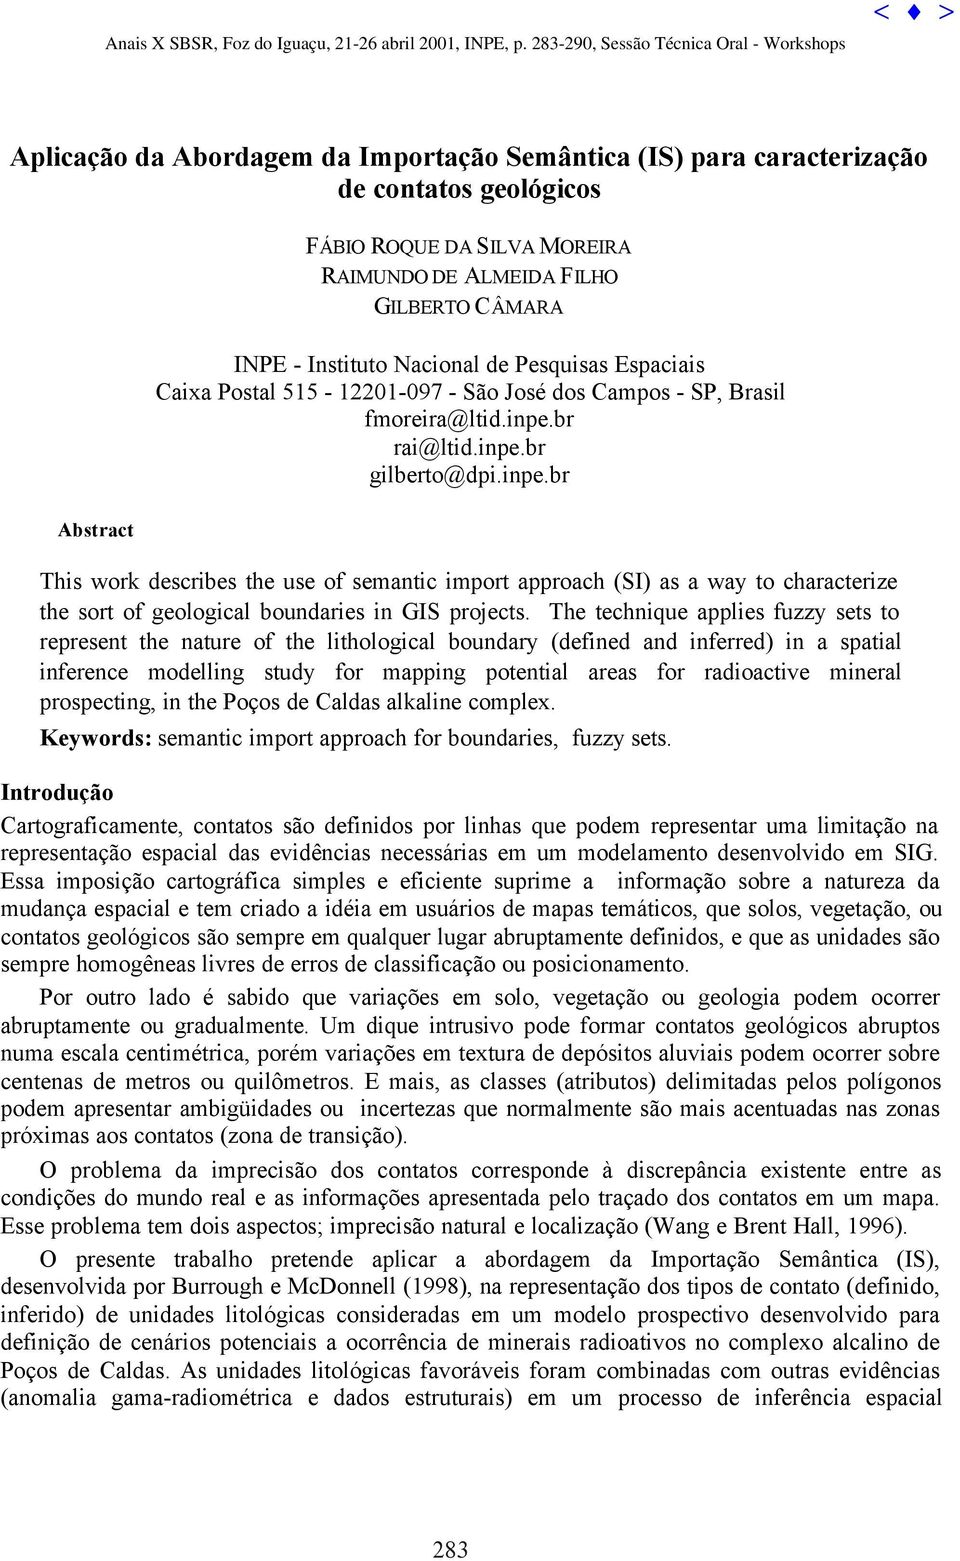 br rai@ltid.inpe.br gilberto@dpi.inpe.br Abstract This work describes the use of semantic import approach (SI) as a way to characterize the sort of geological boundaries in GIS projects.